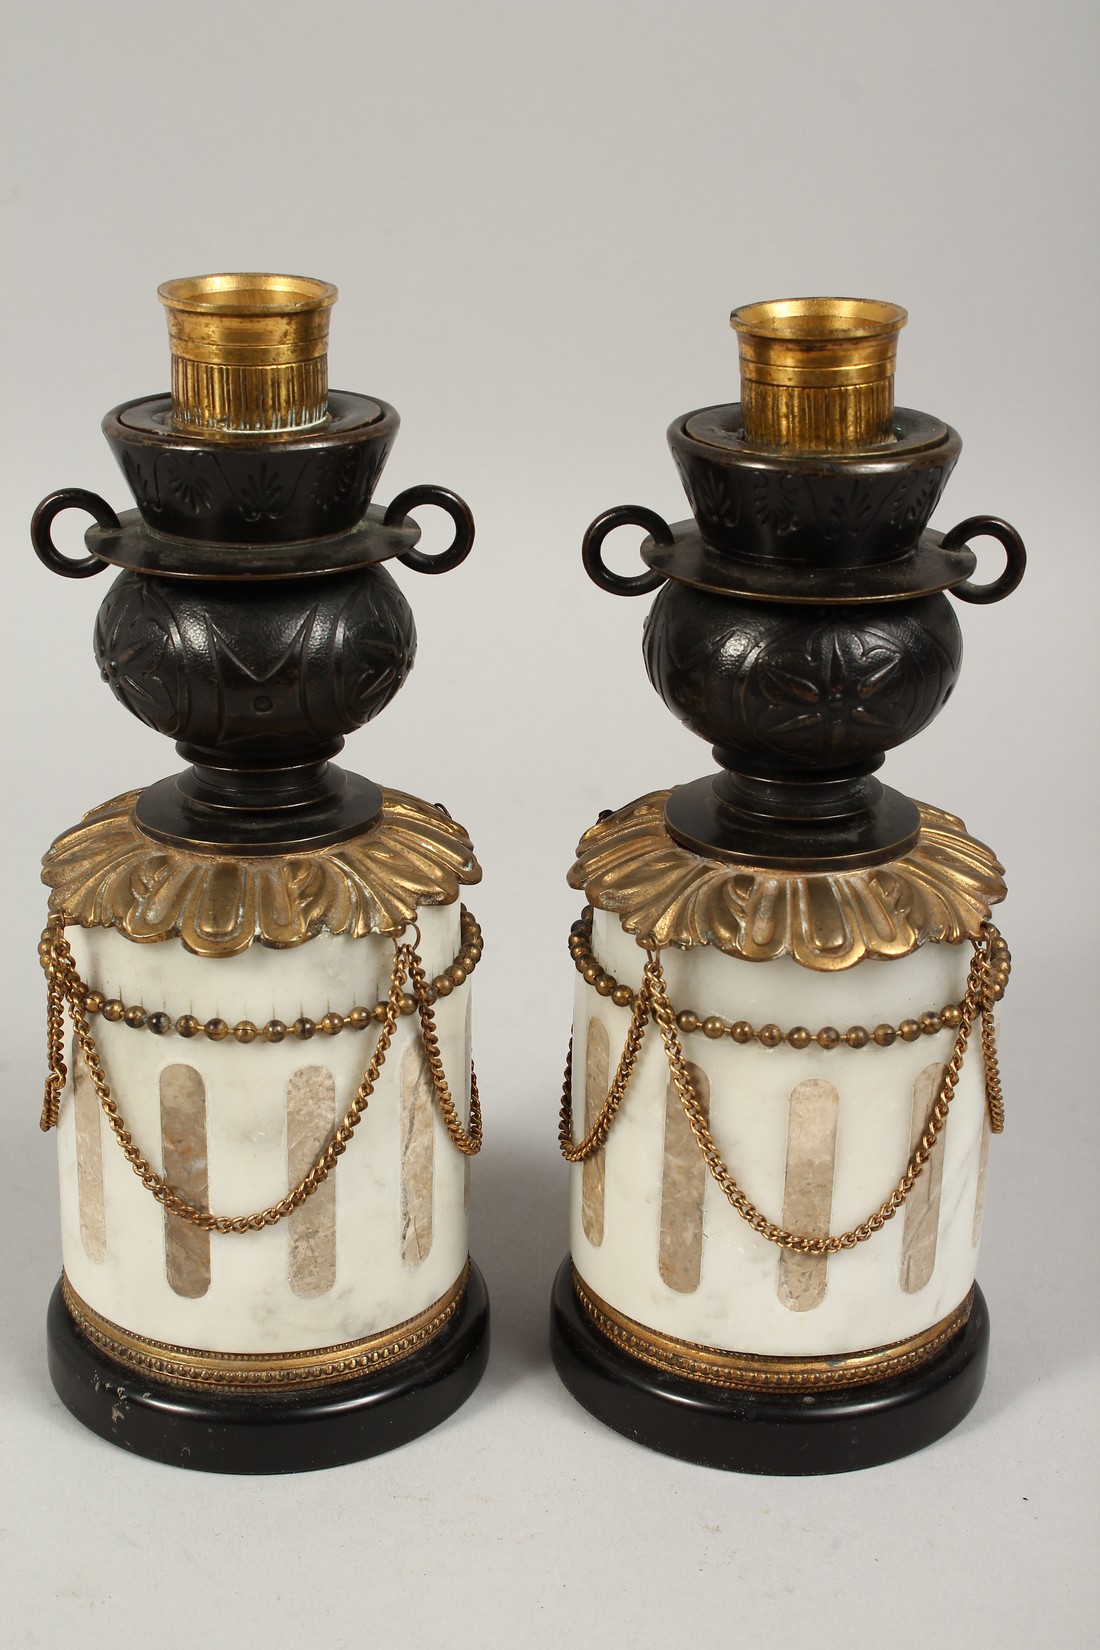 A VERY GOOD PAIR OF REGENCY, BRONZE AND MARBLE TWO-HANDLED CASSOLETTES ON STANDS hung with rope. 9. - Image 2 of 9